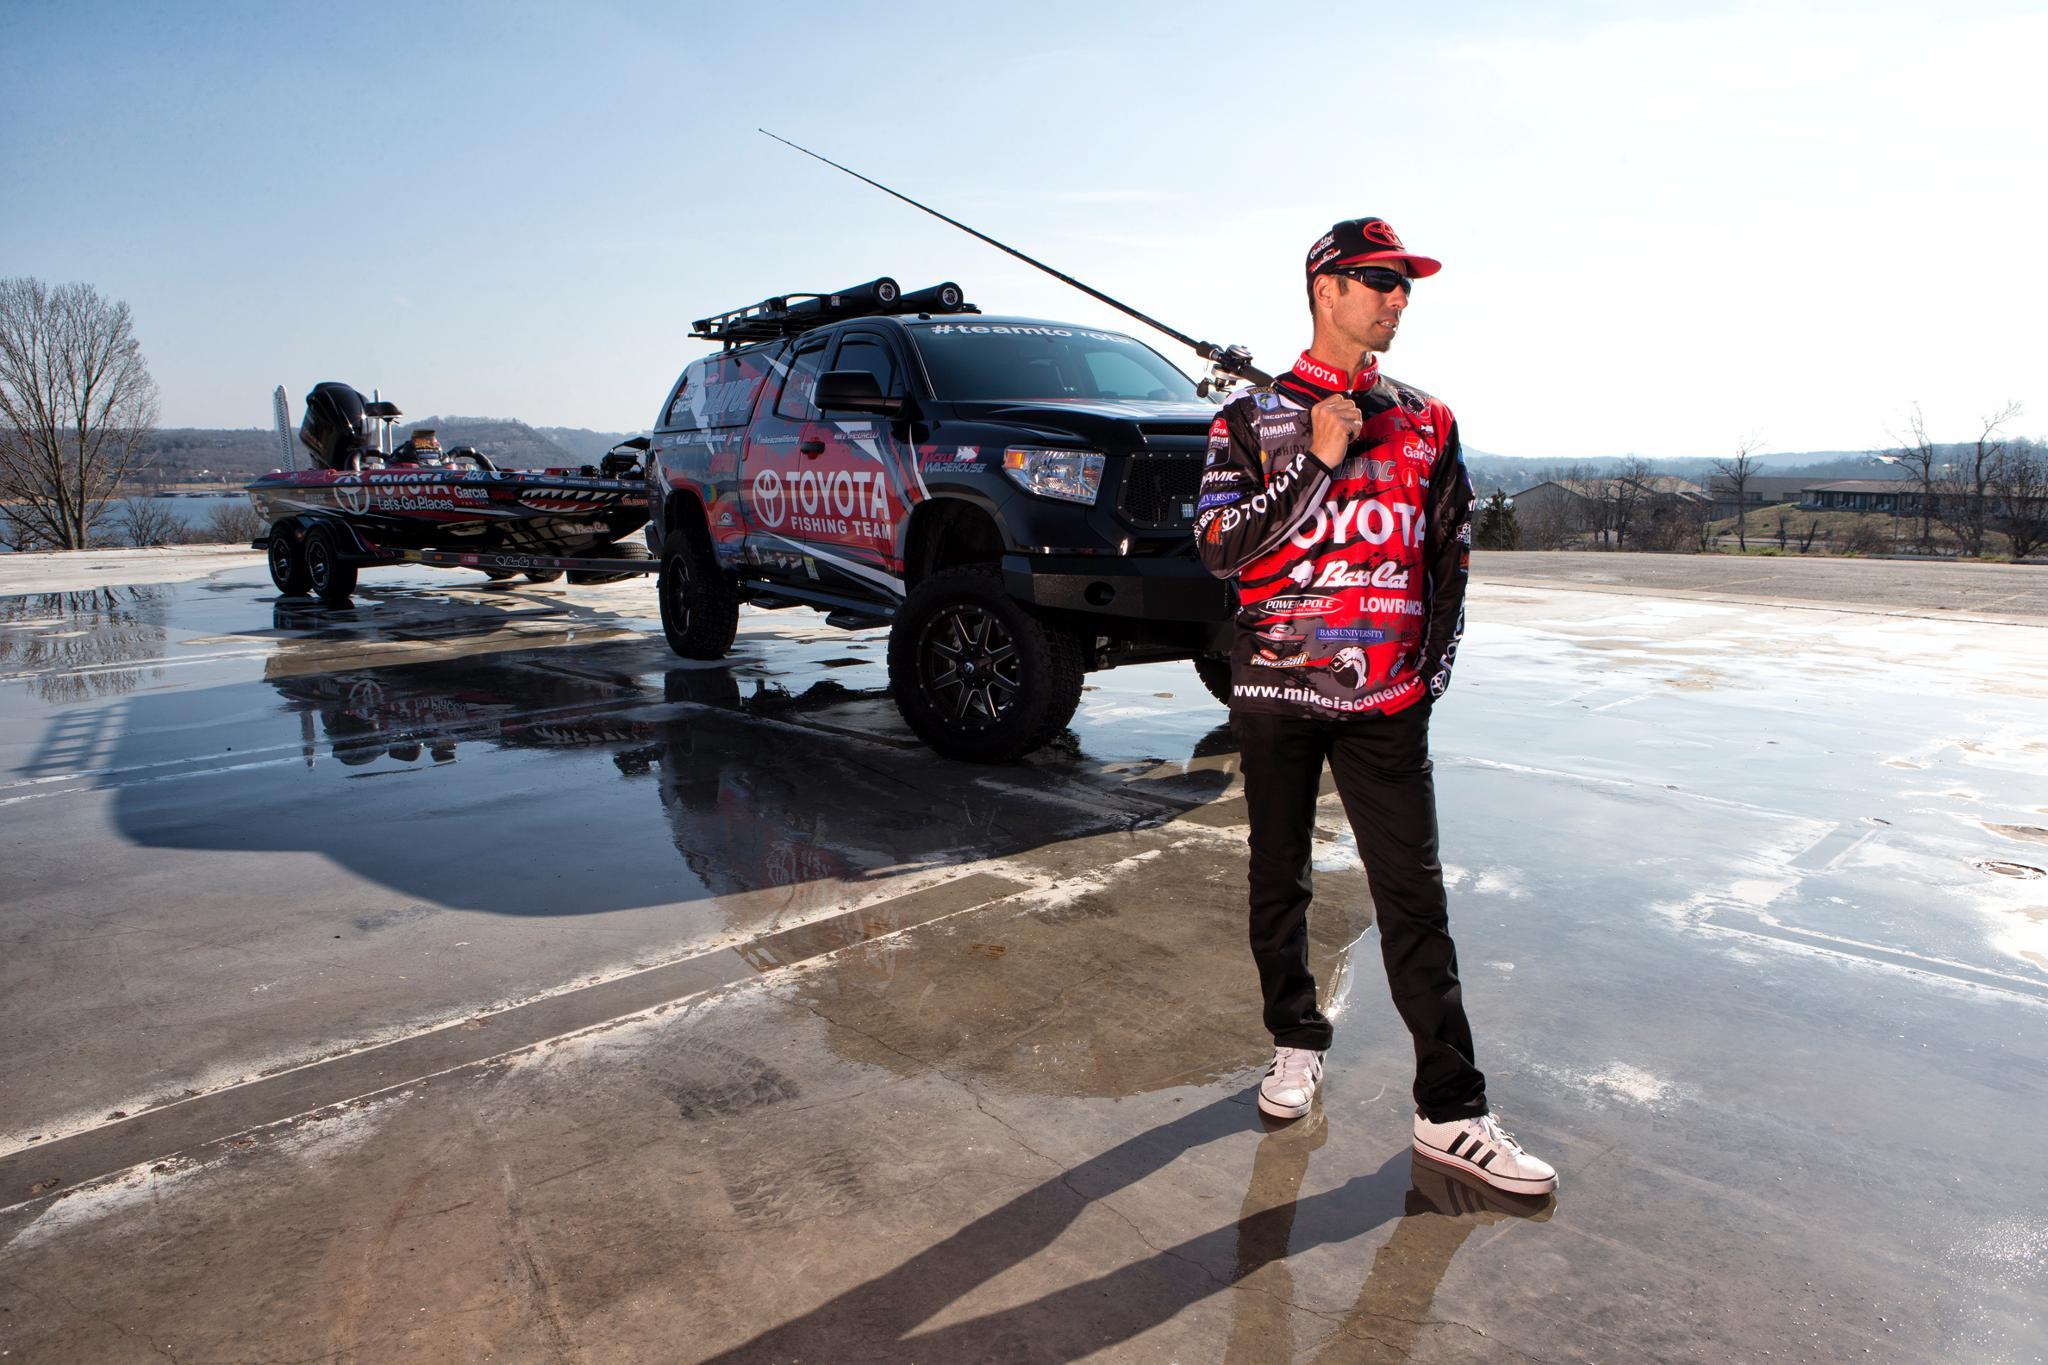 Toyota USA on X: Shout out to #TeamToyota angler @mike_iaconelli who won  the #BassmasterElite in his hometown of Philly this weekend   / X